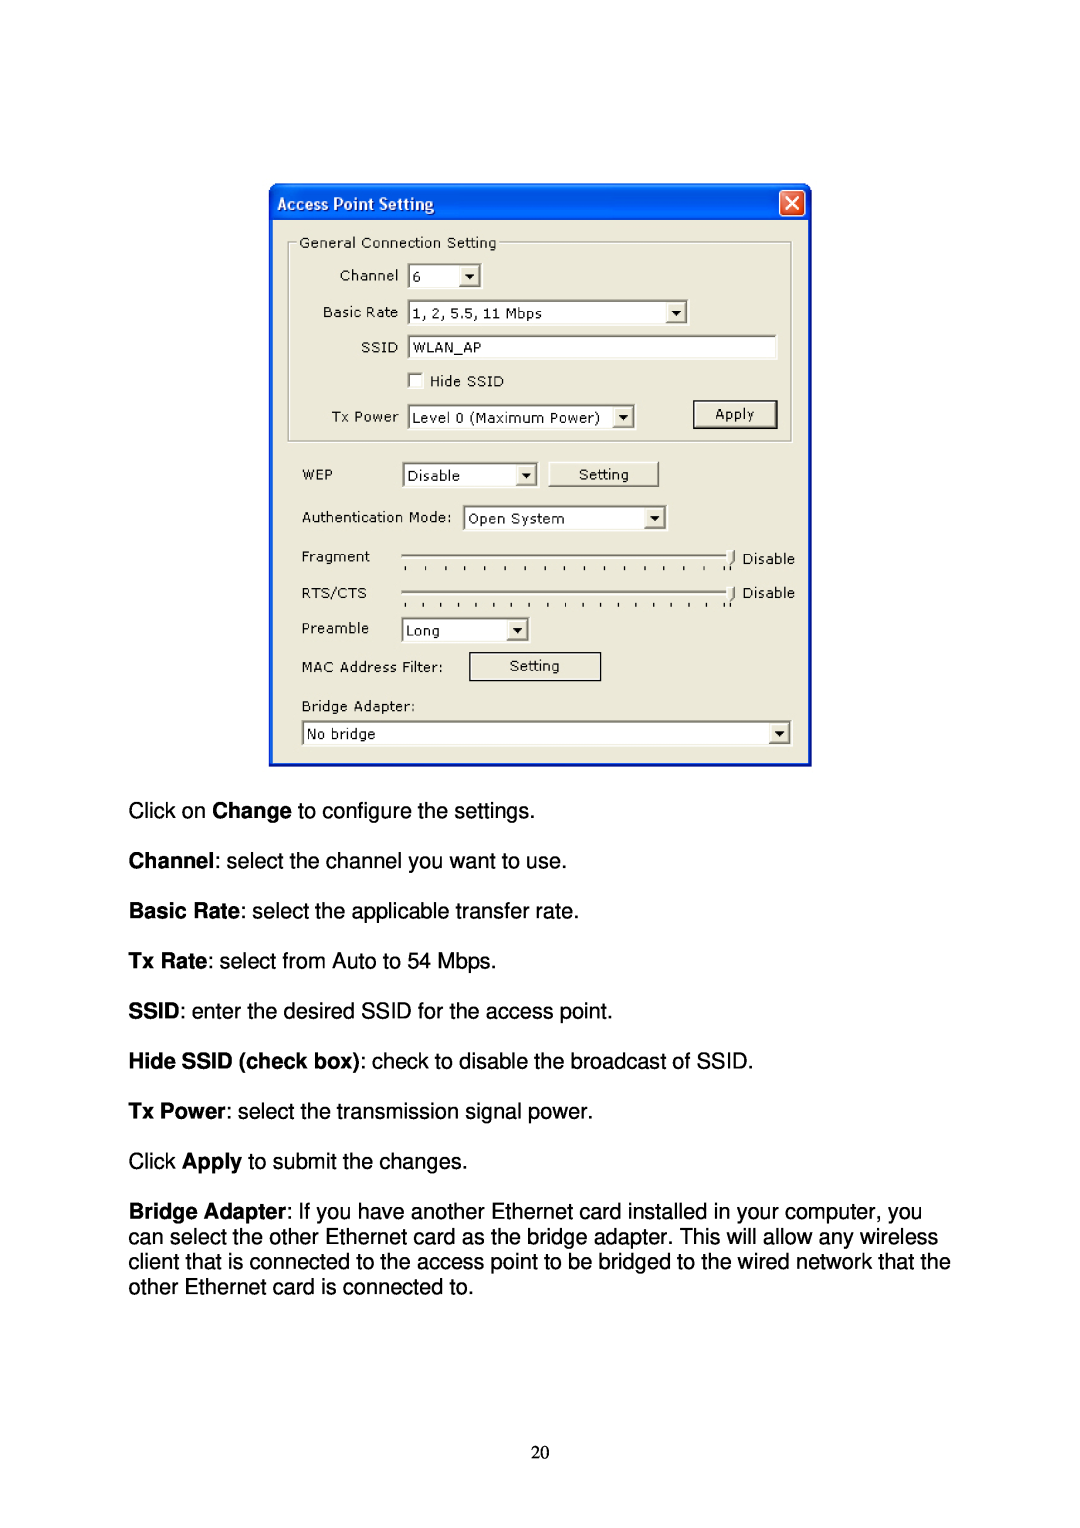 Airlink AWLL3025 user manual Click on Change to configure the settings, Channel select the channel you want to use 